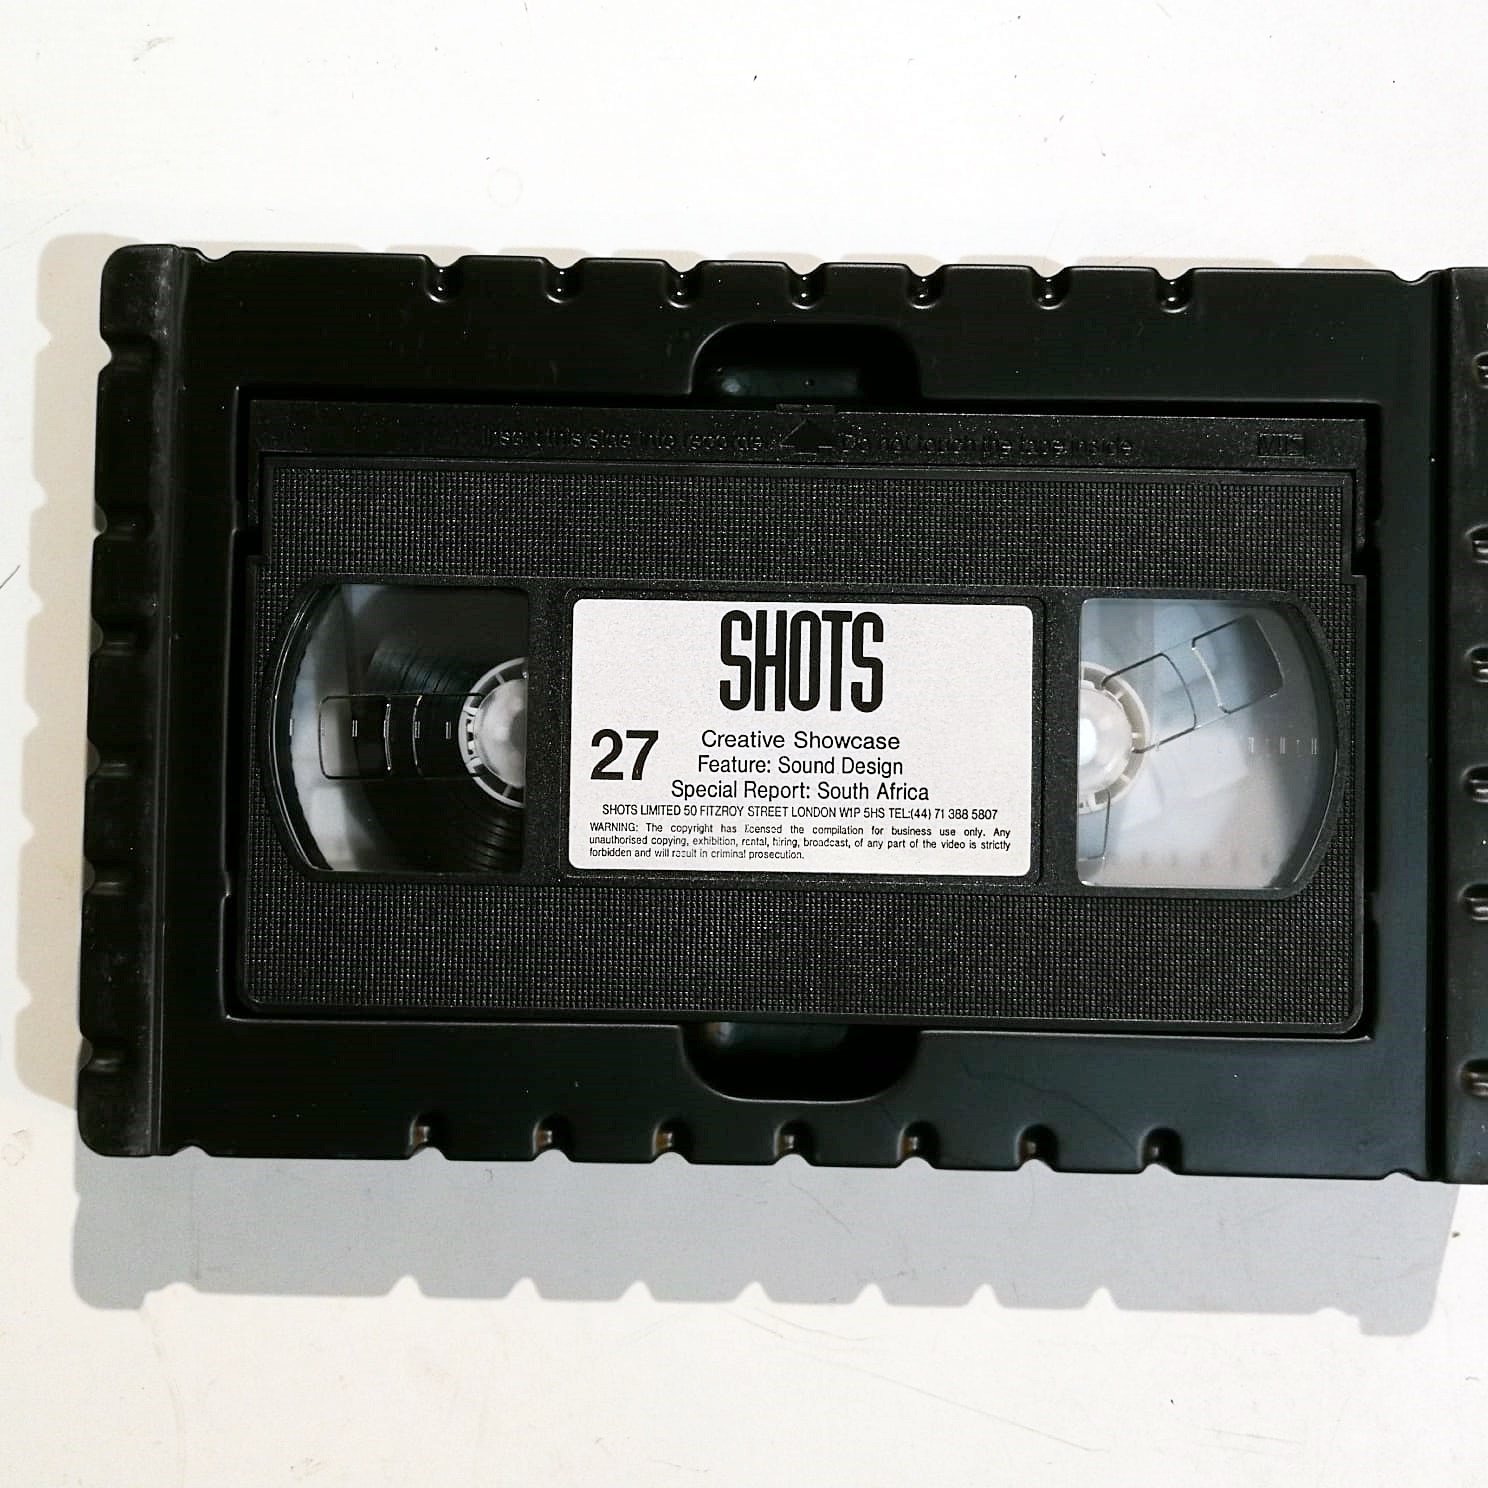 SHOTS No.27 - The Creative Video Programme - South African Special - VHS Kaset